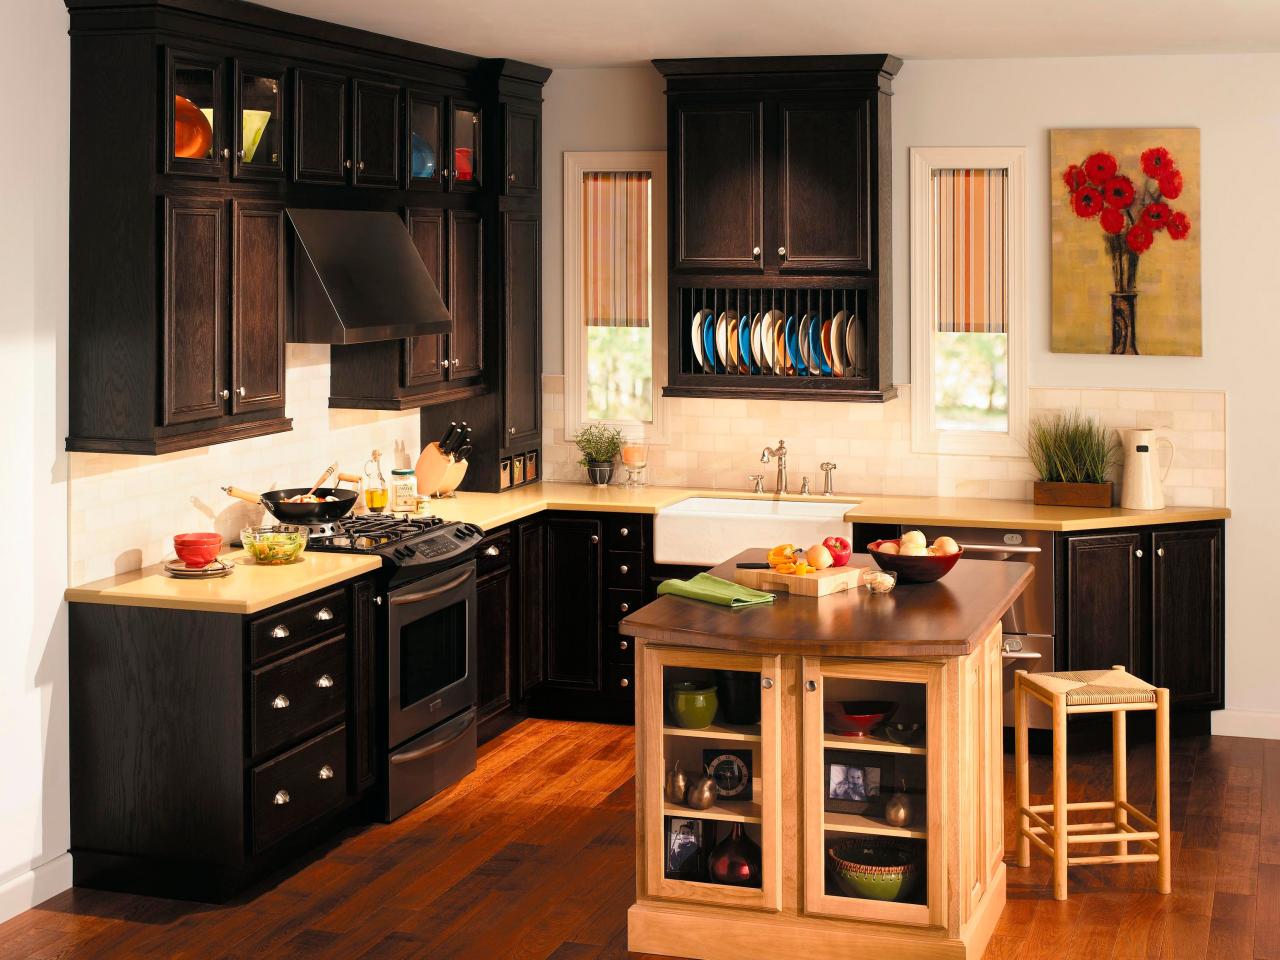 Cabinet Types Which Is Best For You, How To Tell What Kind Of Kitchen Cabinets You Have